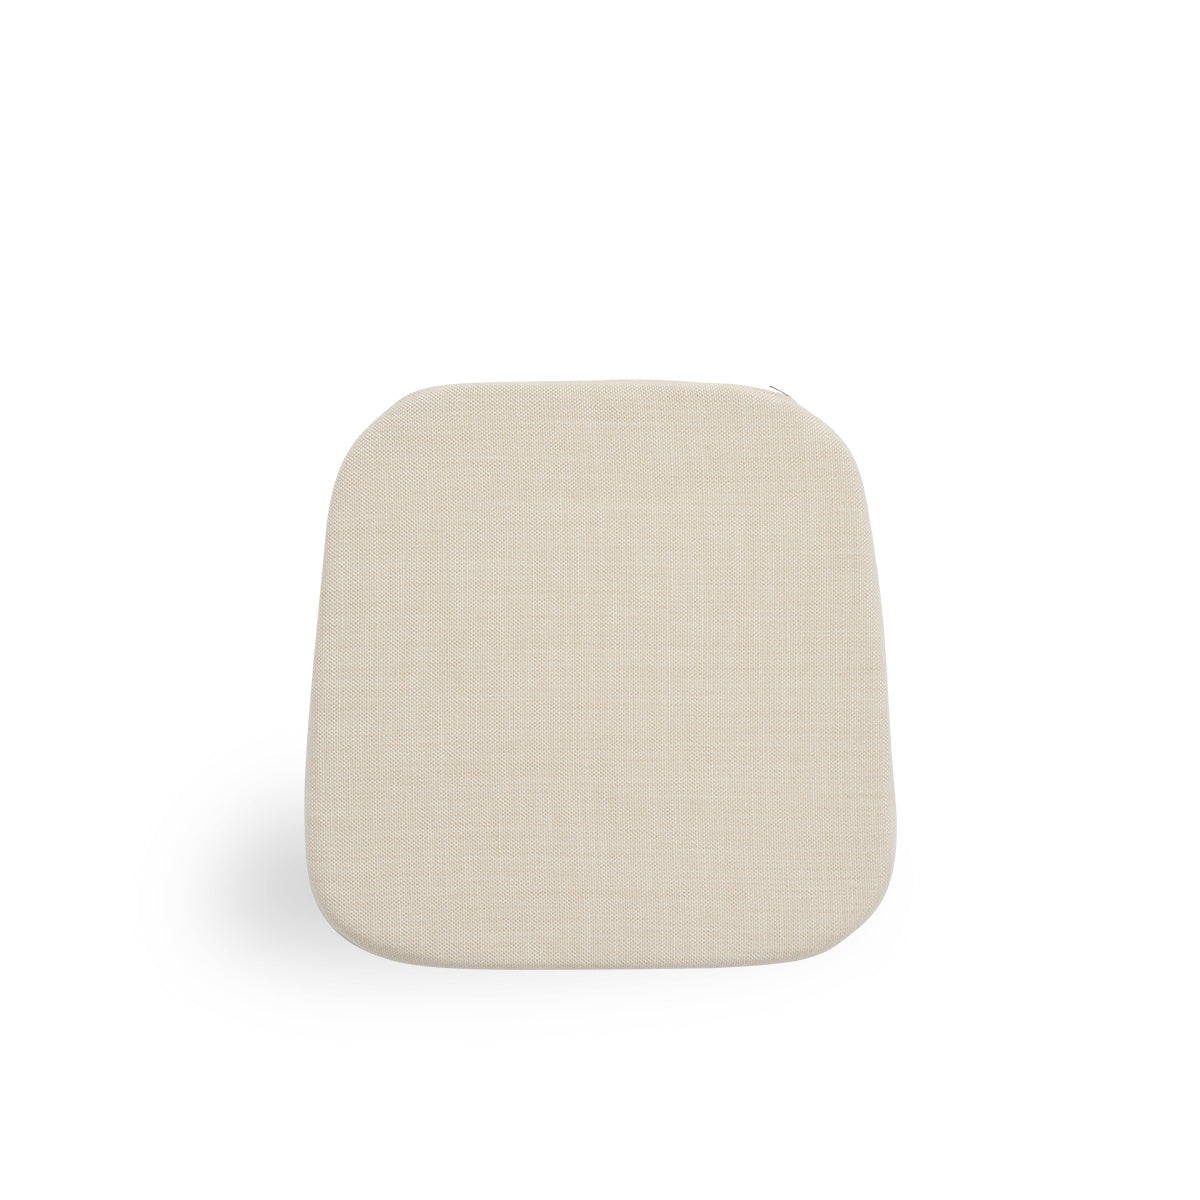 Romantica Dining Chair | Seat cushion by Sika